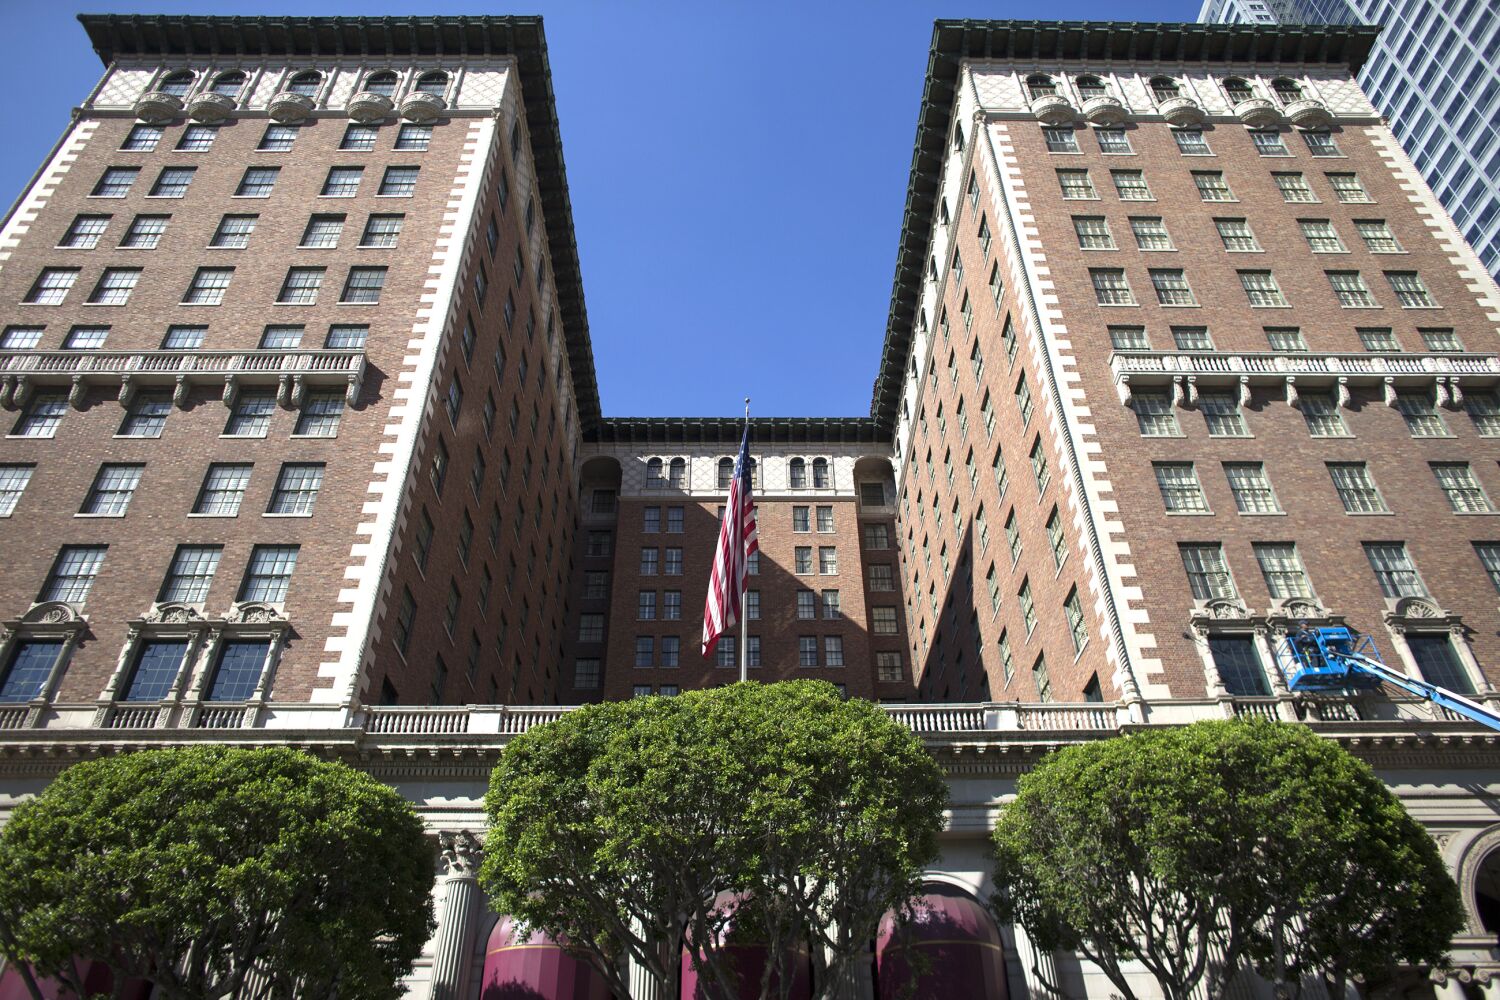 Violence and 'crisis': How hundreds of L.A. County's abused children ended up in hotels